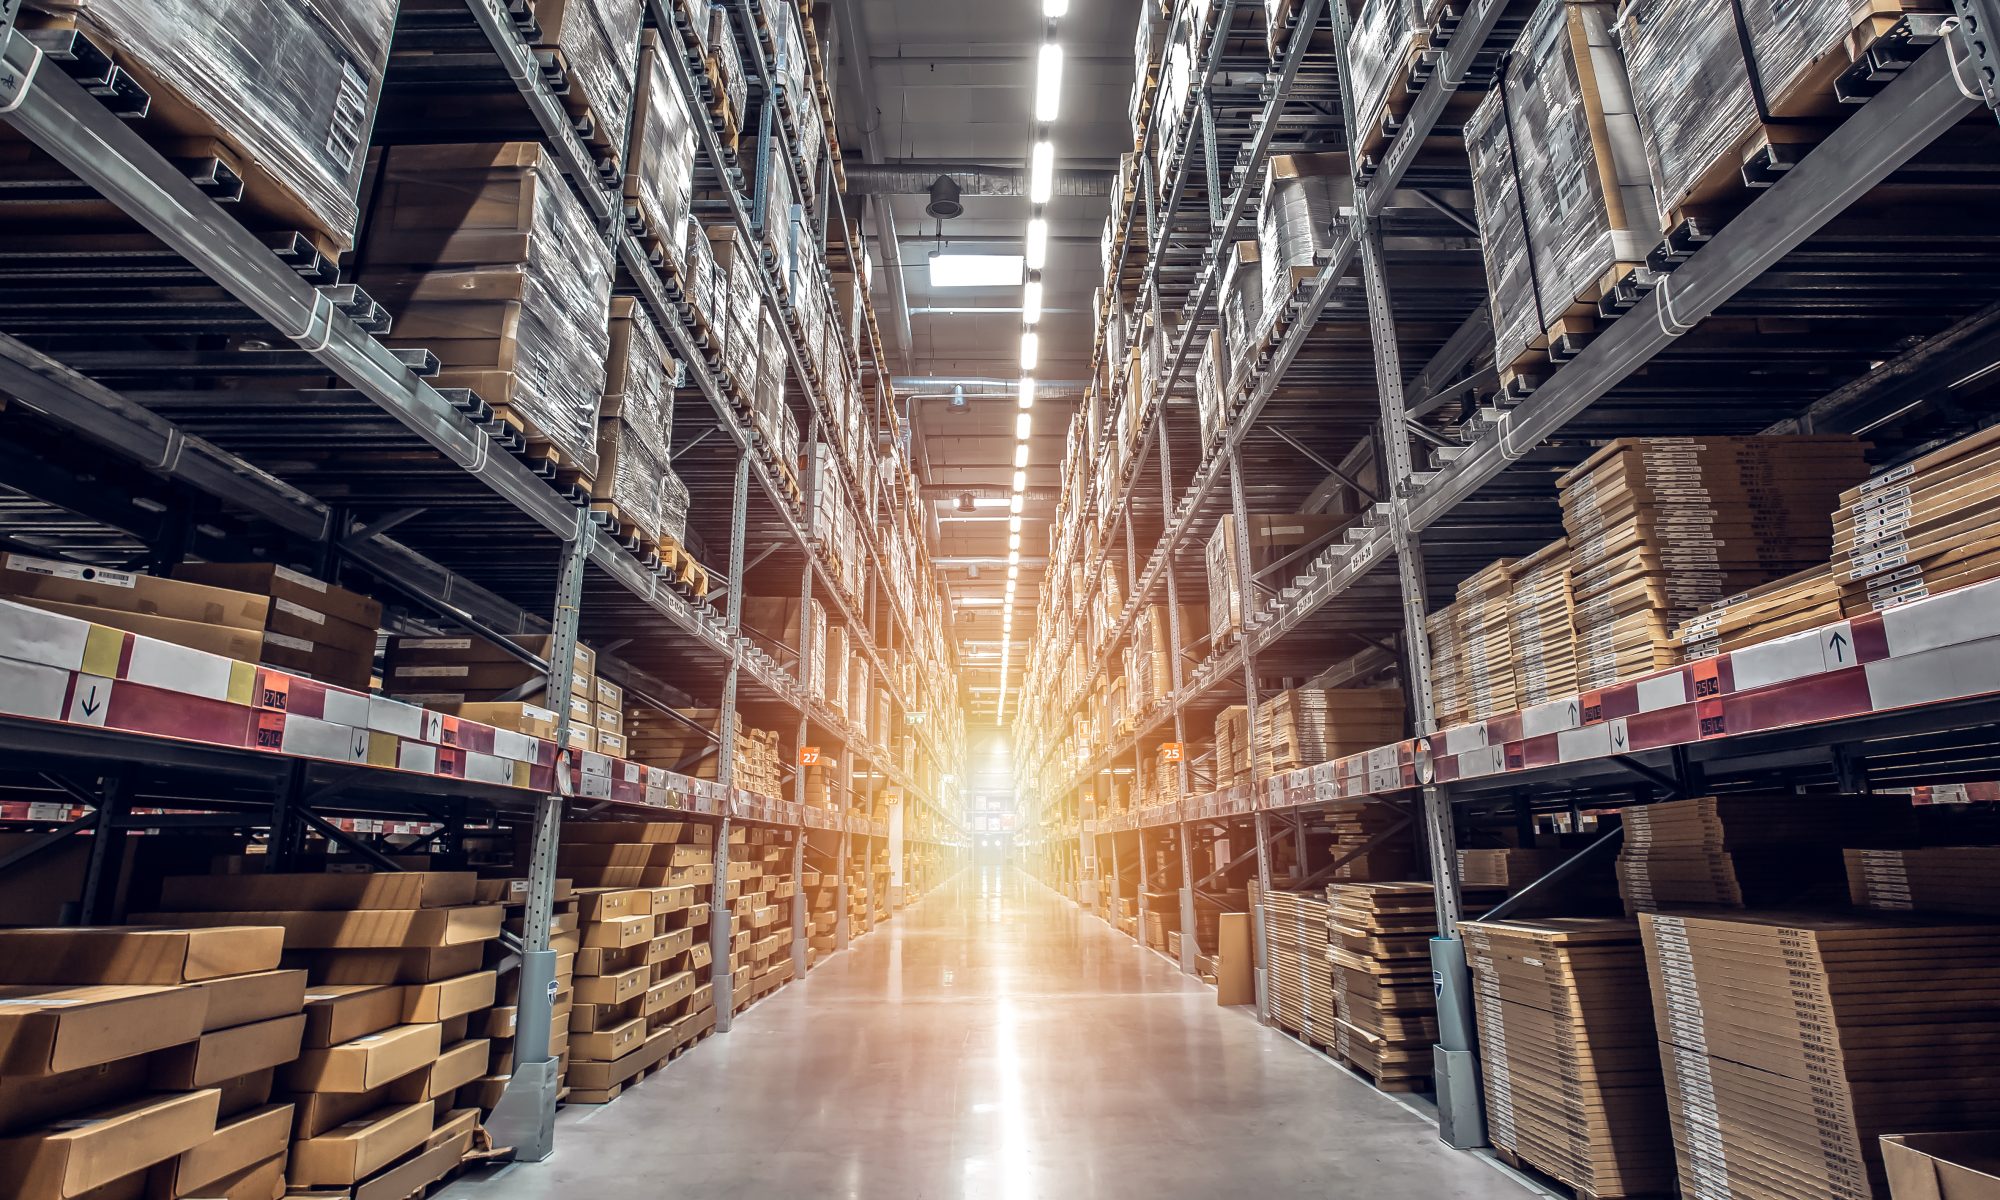 A photo captures a long shot of a warehouse with light pouring in.